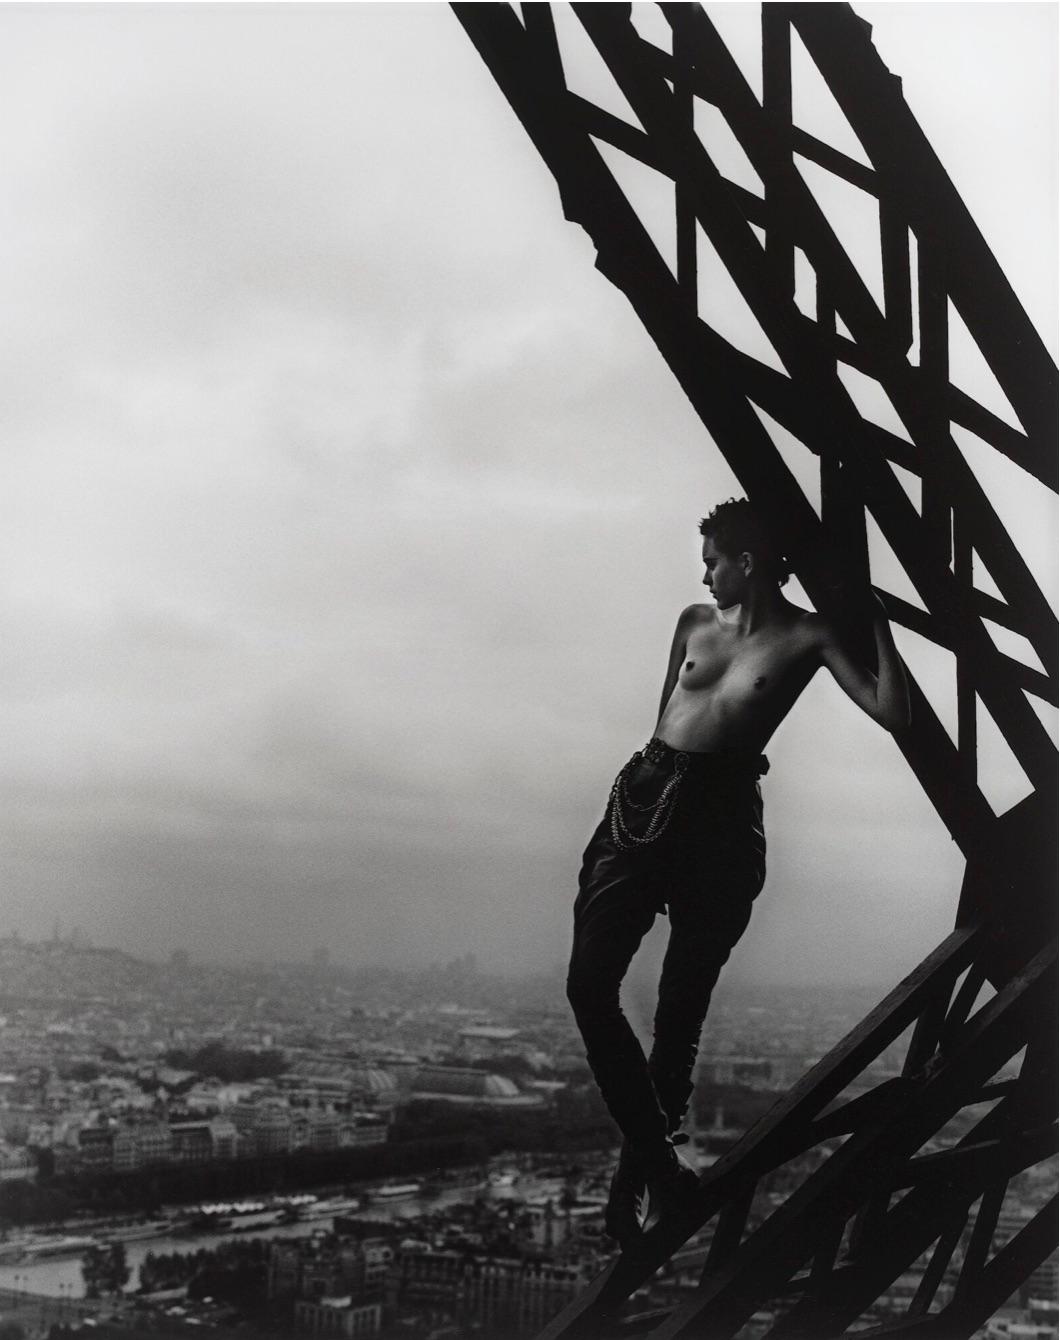 Mathilde on the Eiffel Tower (Hommage to Marc Riboud), Paris, 1989 - Photograph by Peter Lindbergh